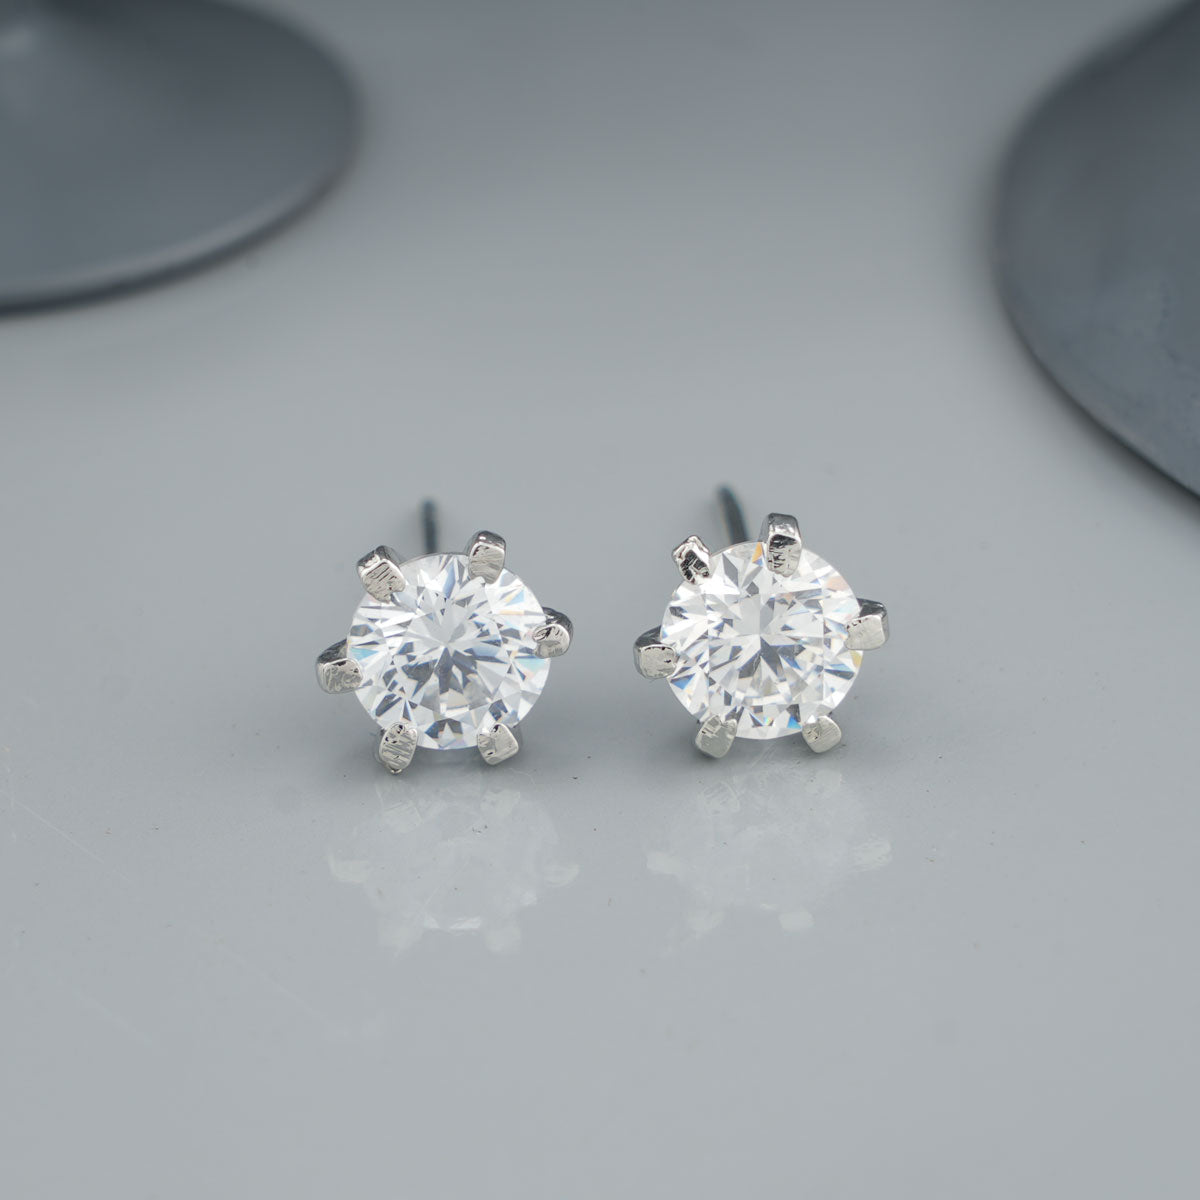 2019 Simple Romantic Crystal Stone One Round Stud Earrings For Women  Rhinestone Ceramic Earrings For Party